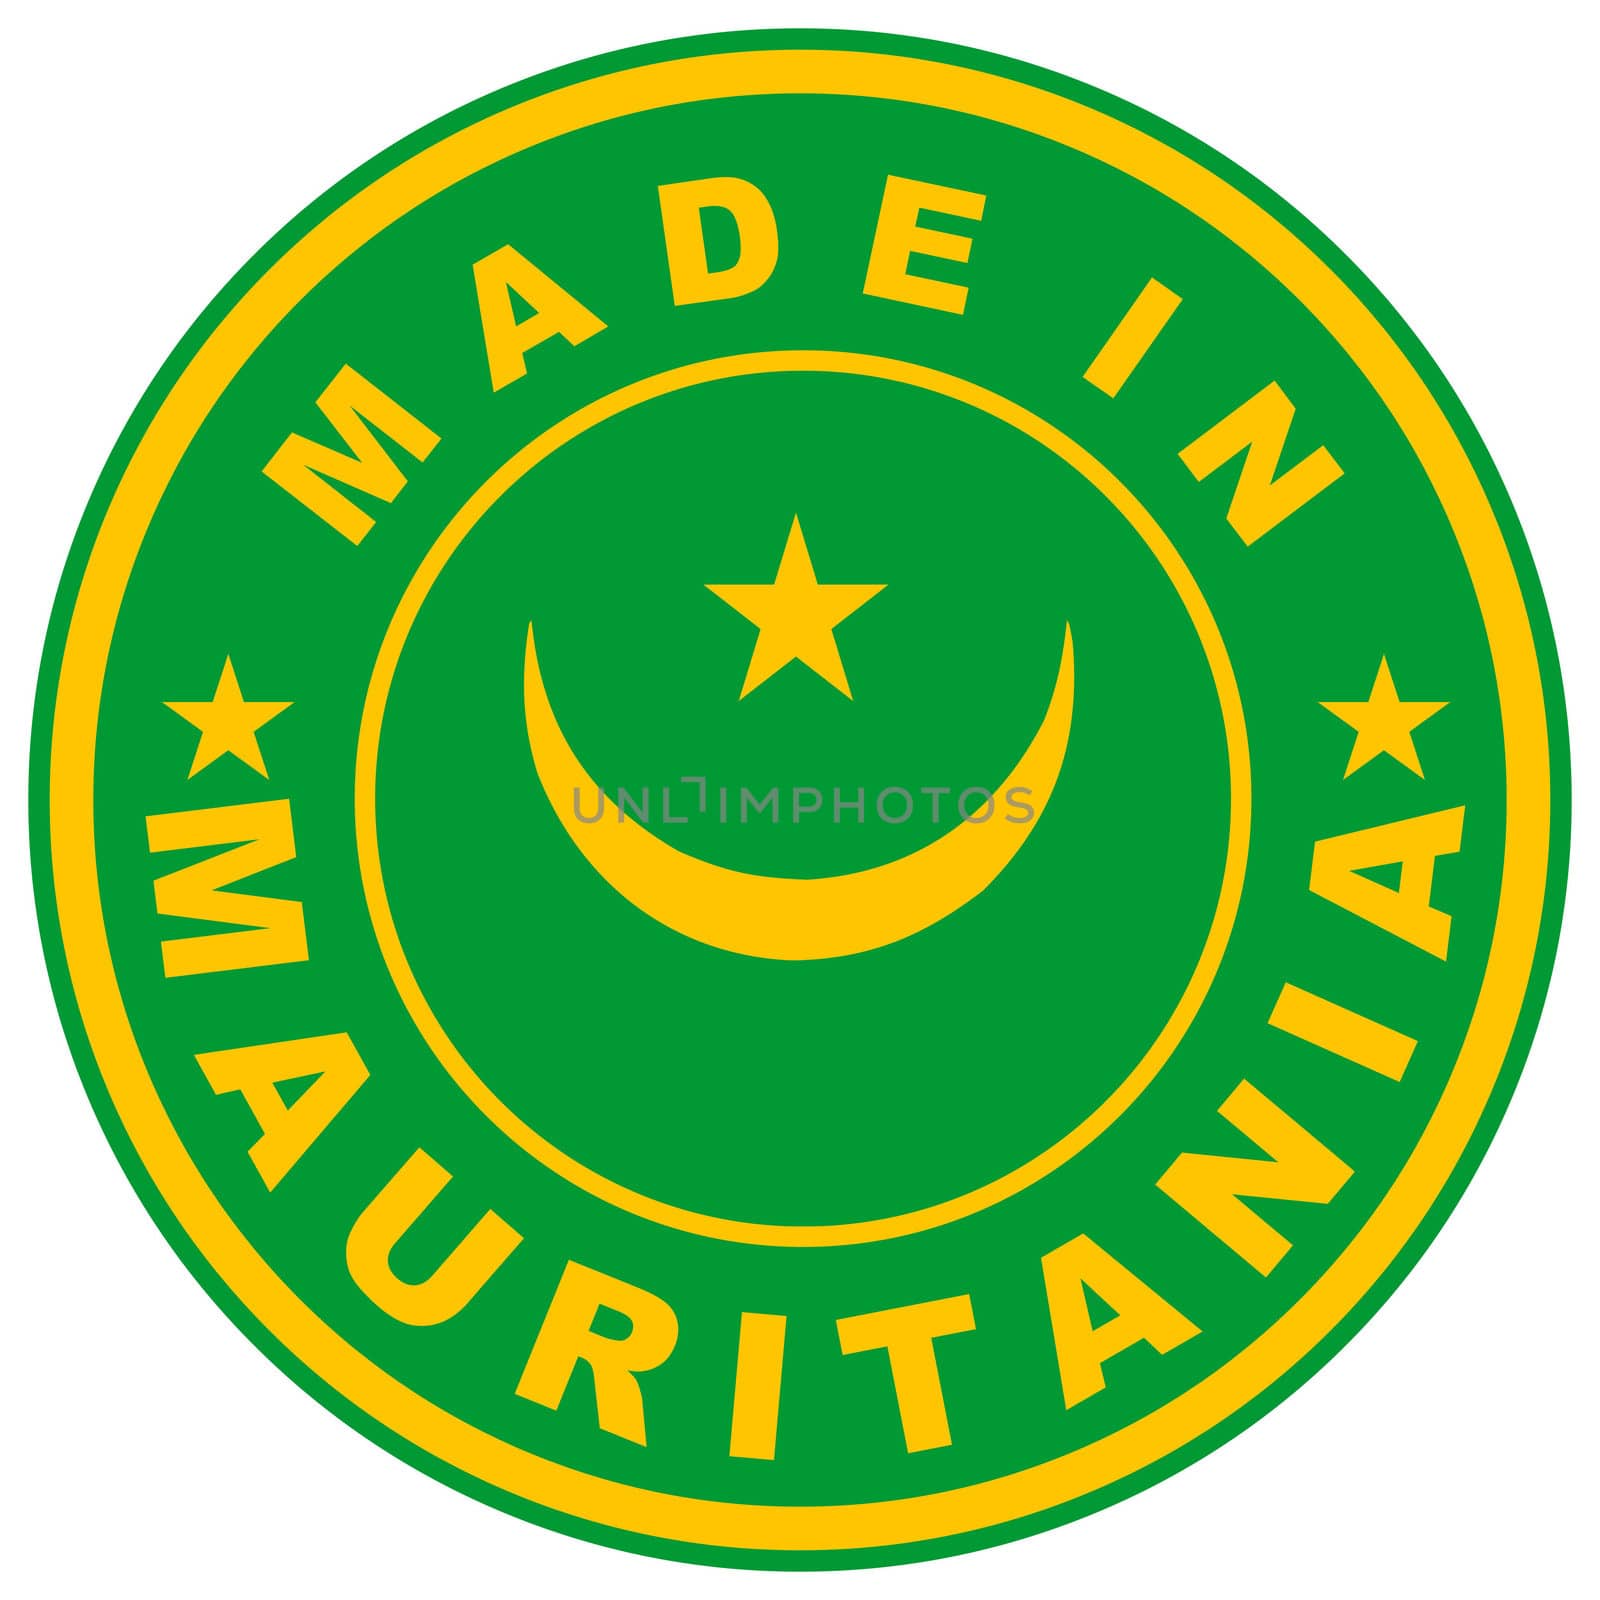 very big size made in mauritania country label